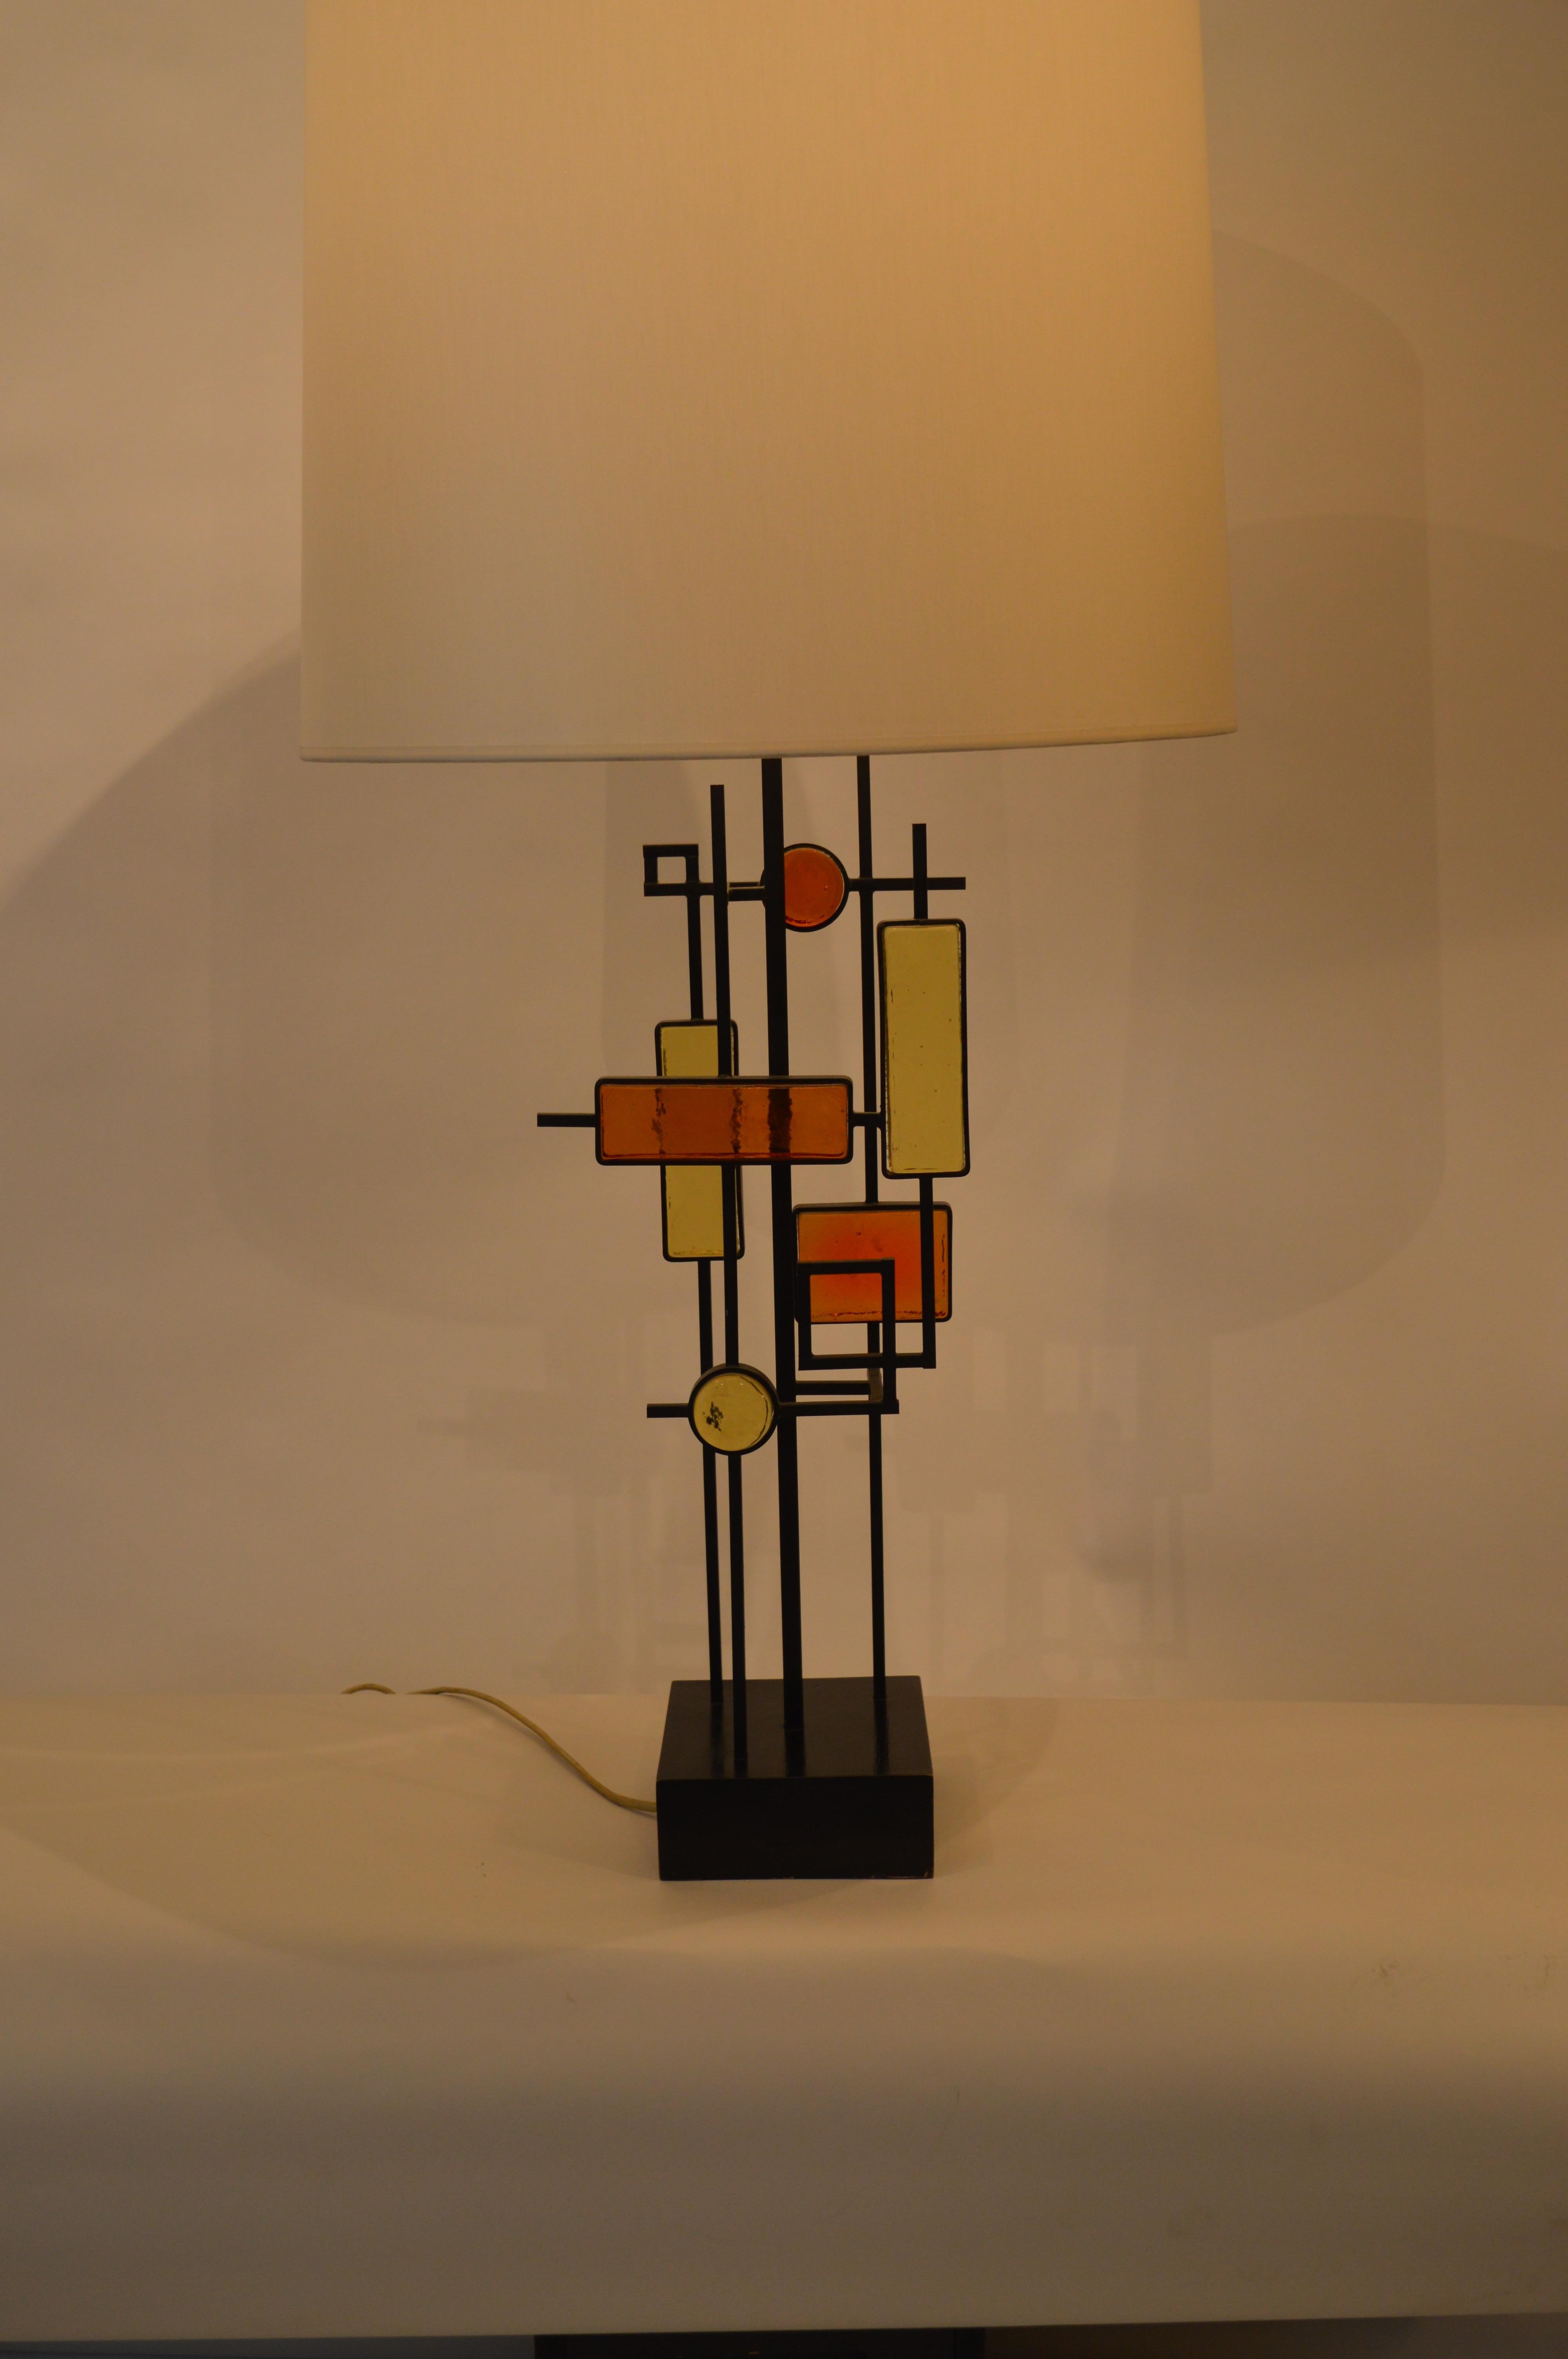 Table lamp by Holm Sorensen.
Glass and lacquered metal.
Danish work, circa 1960.
Lampshade redone as original with removable top.
       